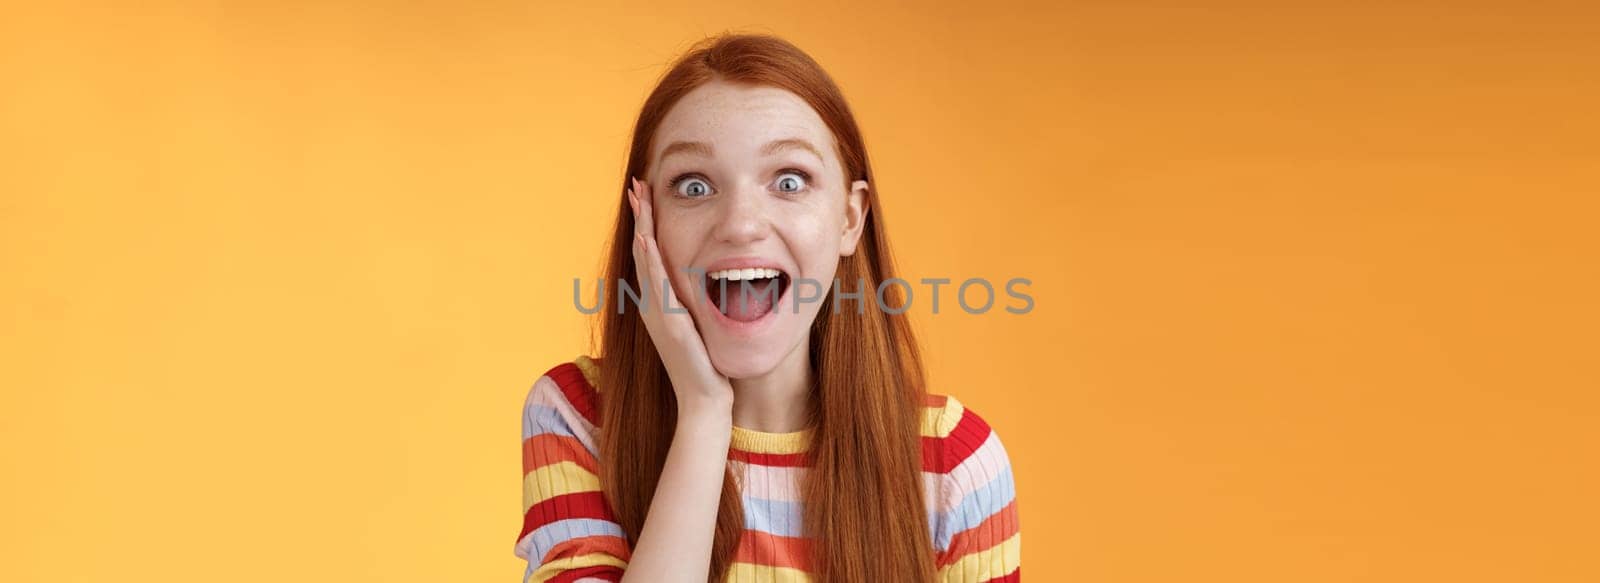 Amused happy smiling good-looking redhead woman screaming happily touch cheek astonished receive good perfect news triumphing feeling excited look thrilled camera, standing orange background.